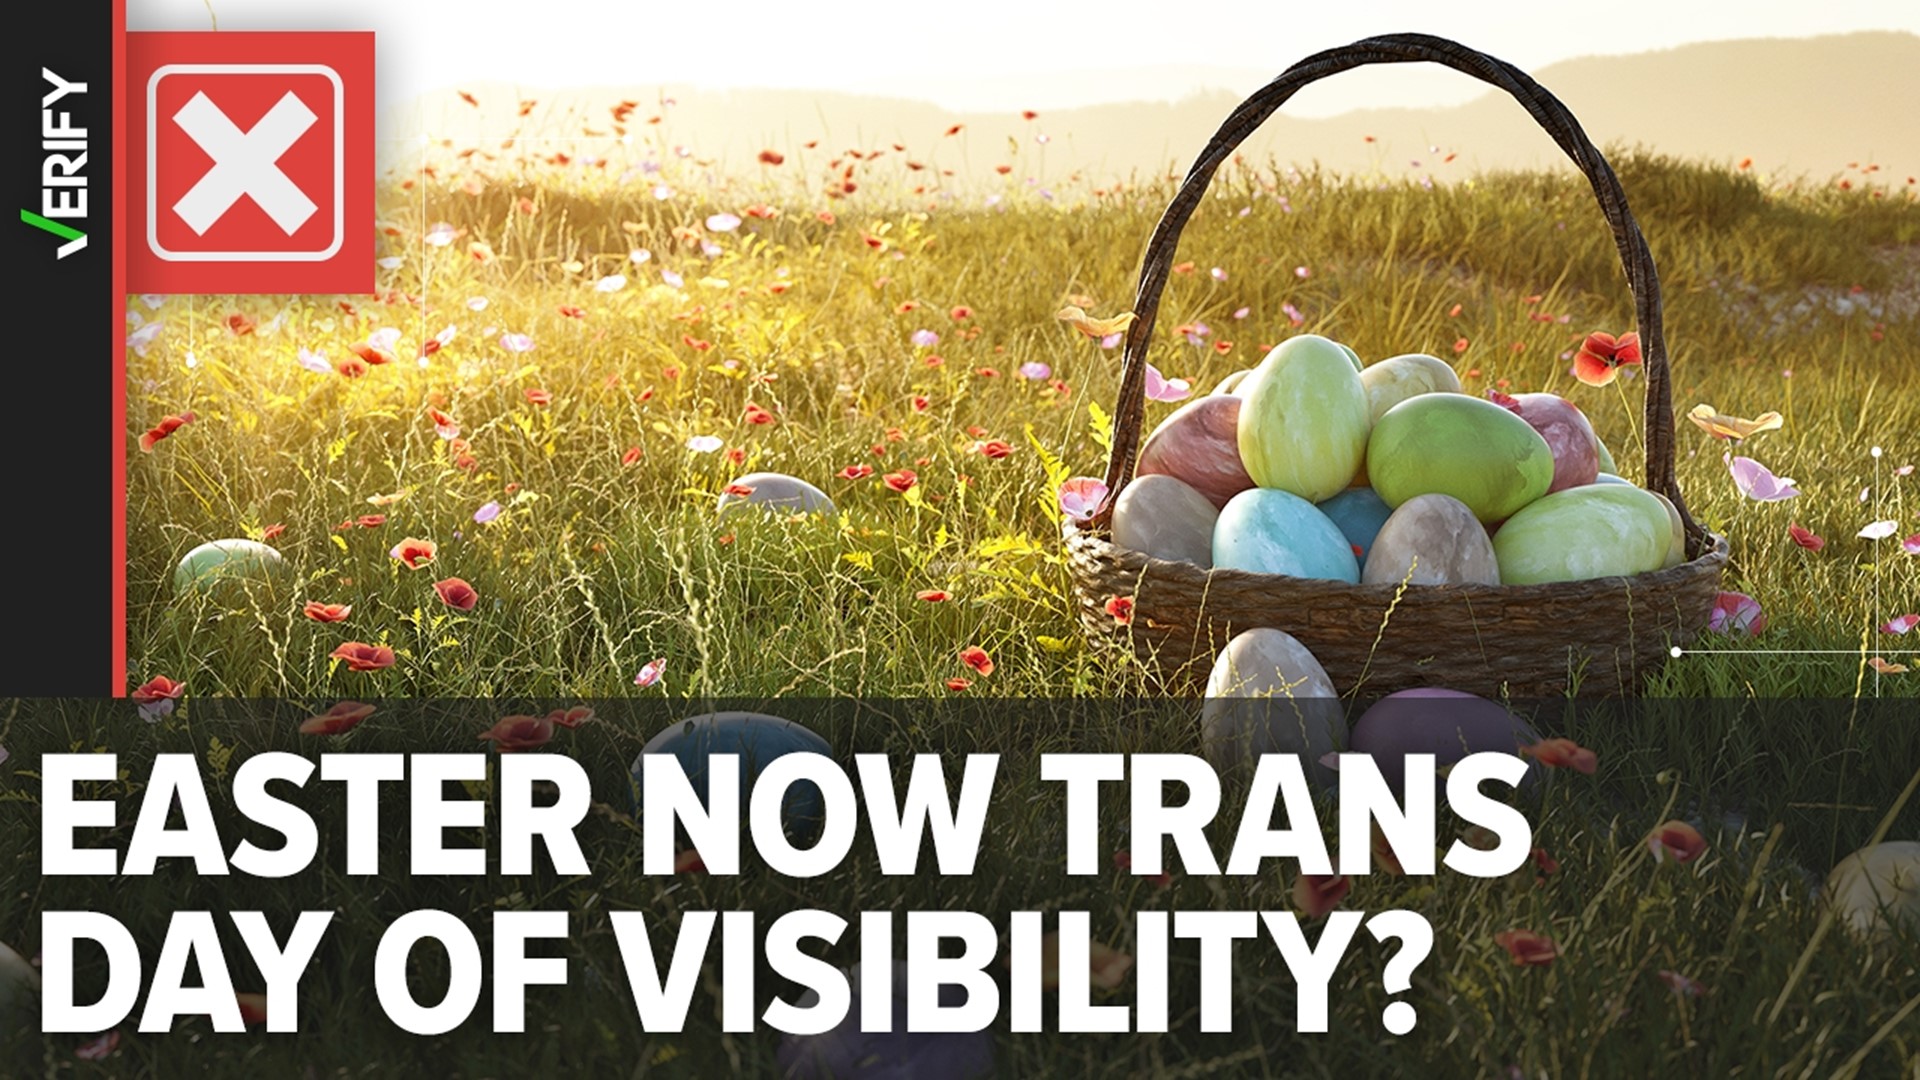 Transgender Day of Visibility has been celebrated annually on March 31 since 2009. Easter’s date changes every year; this year it was also on March 31.